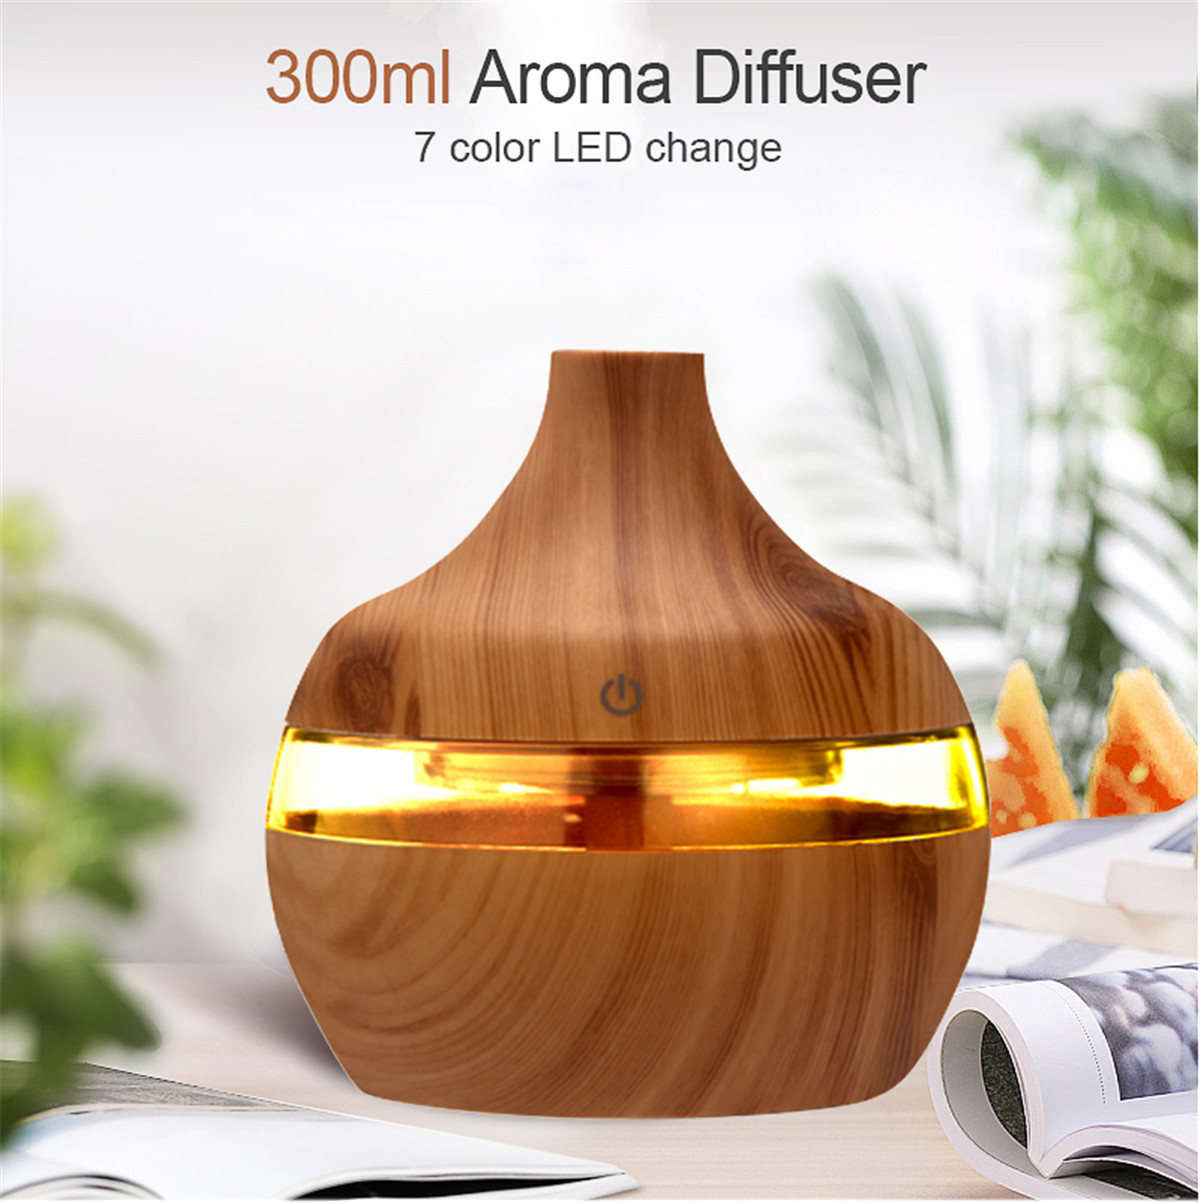 300ml-Electric-Ultrasonic-Air-Mist-Humidifier-Purifier-Aroma-Diffuser-7-Colors-LED-USB-Charging-for--1761154-4